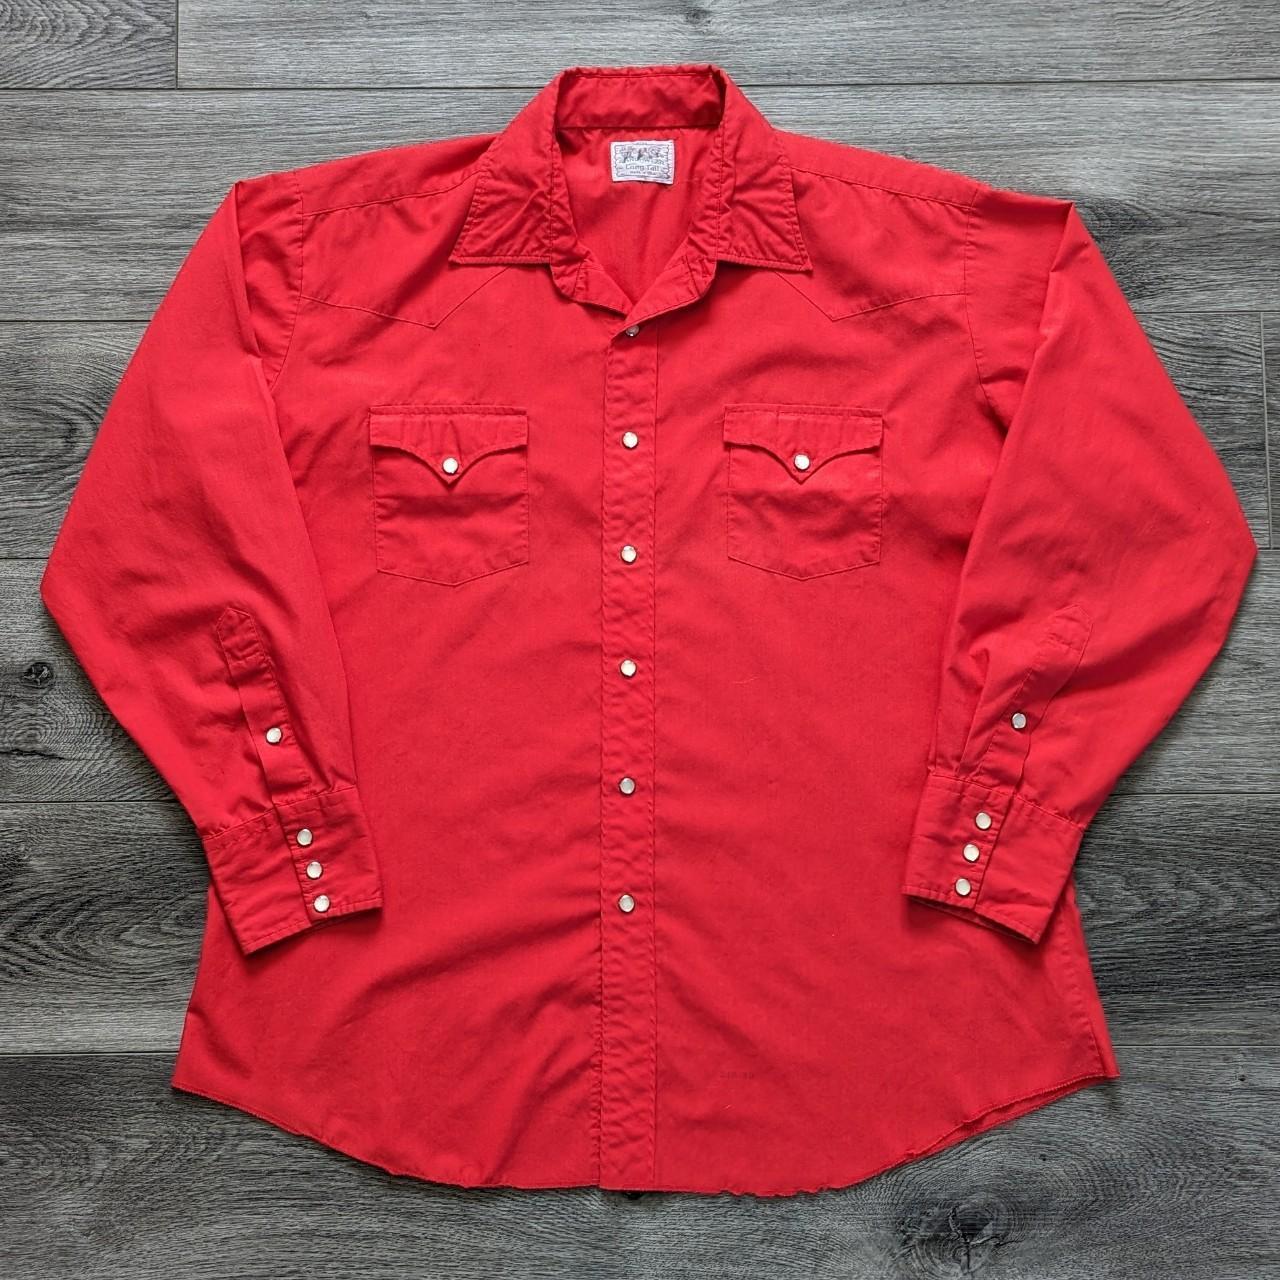 Vintage 70s H Bar C red pearl snap western shirt!, A...